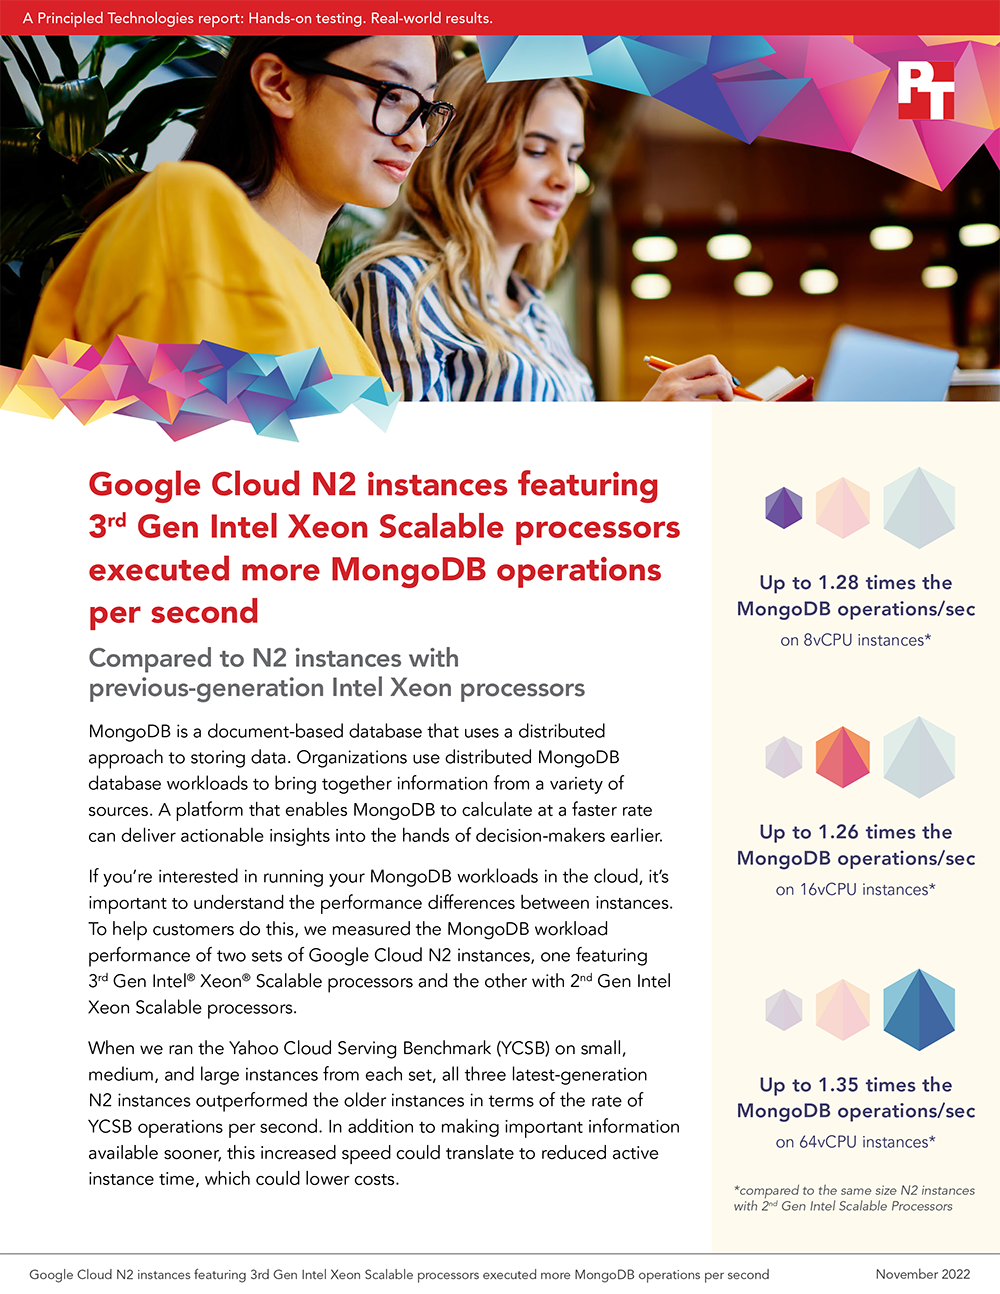 New Google Cloud N2 Instances with 3rd Gen Intel Xeon Scalable Processors Completed More MongoDB Work Faster Than N2 Instances with Older Intel Processors